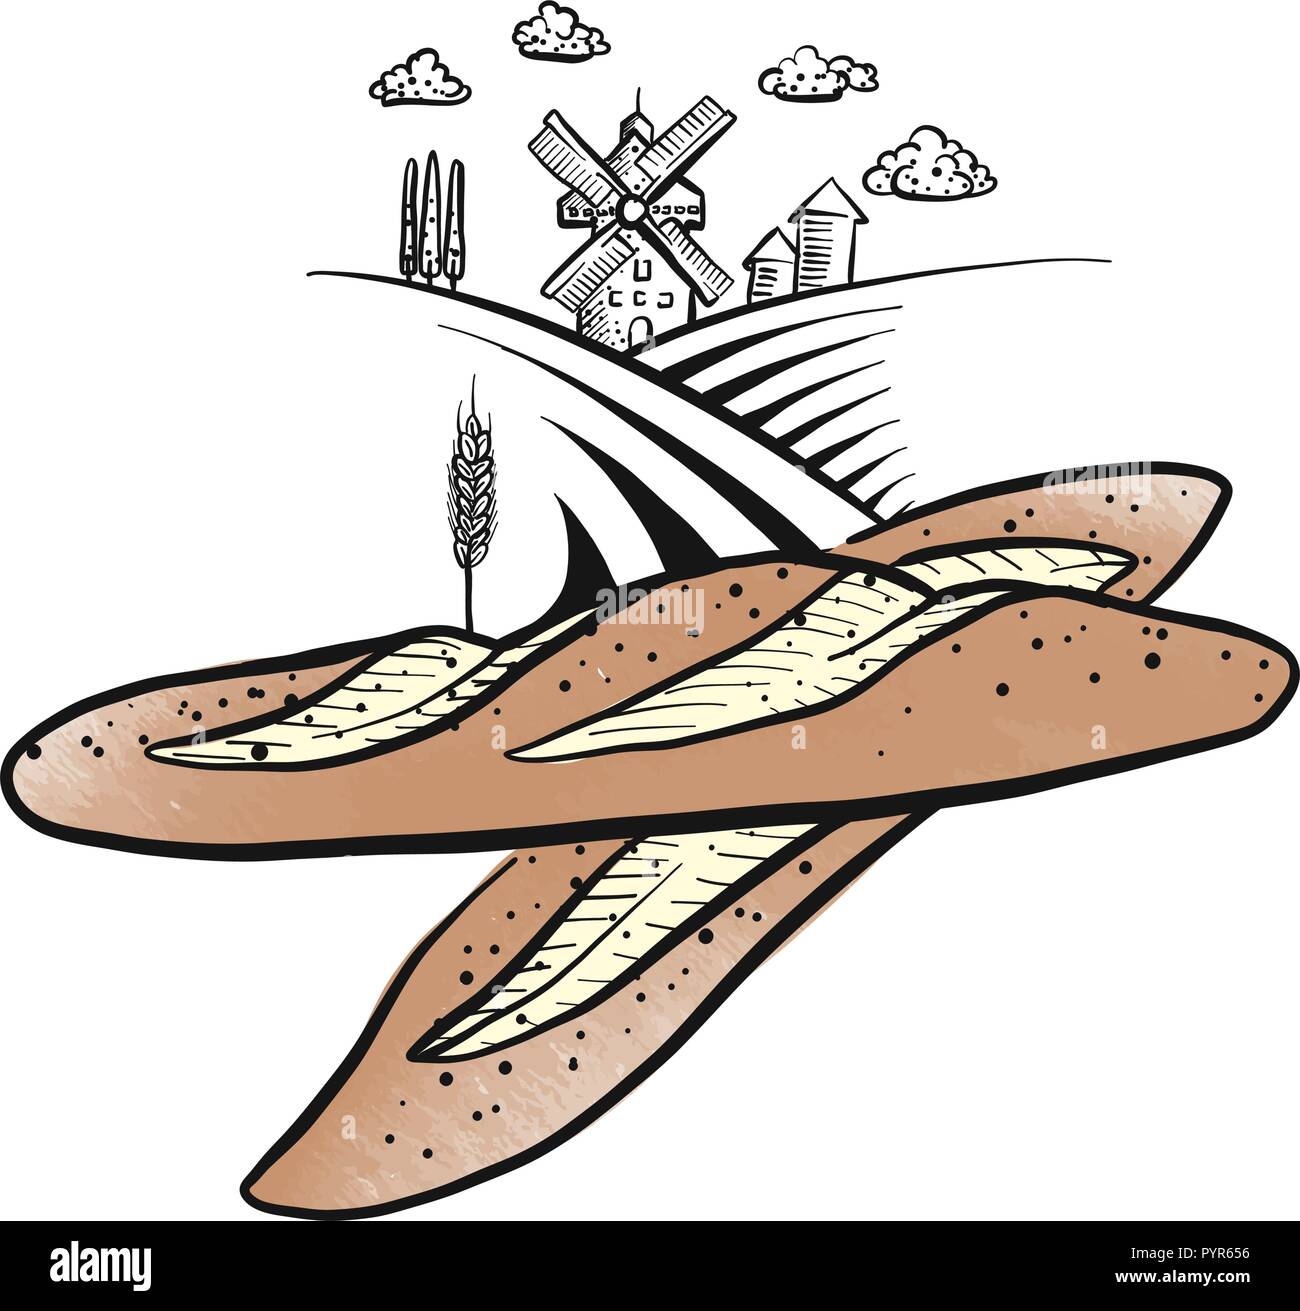 Hand drawn baguette sketch icon with bakery mill. Black vector outlines and colored fills. Stock Vector